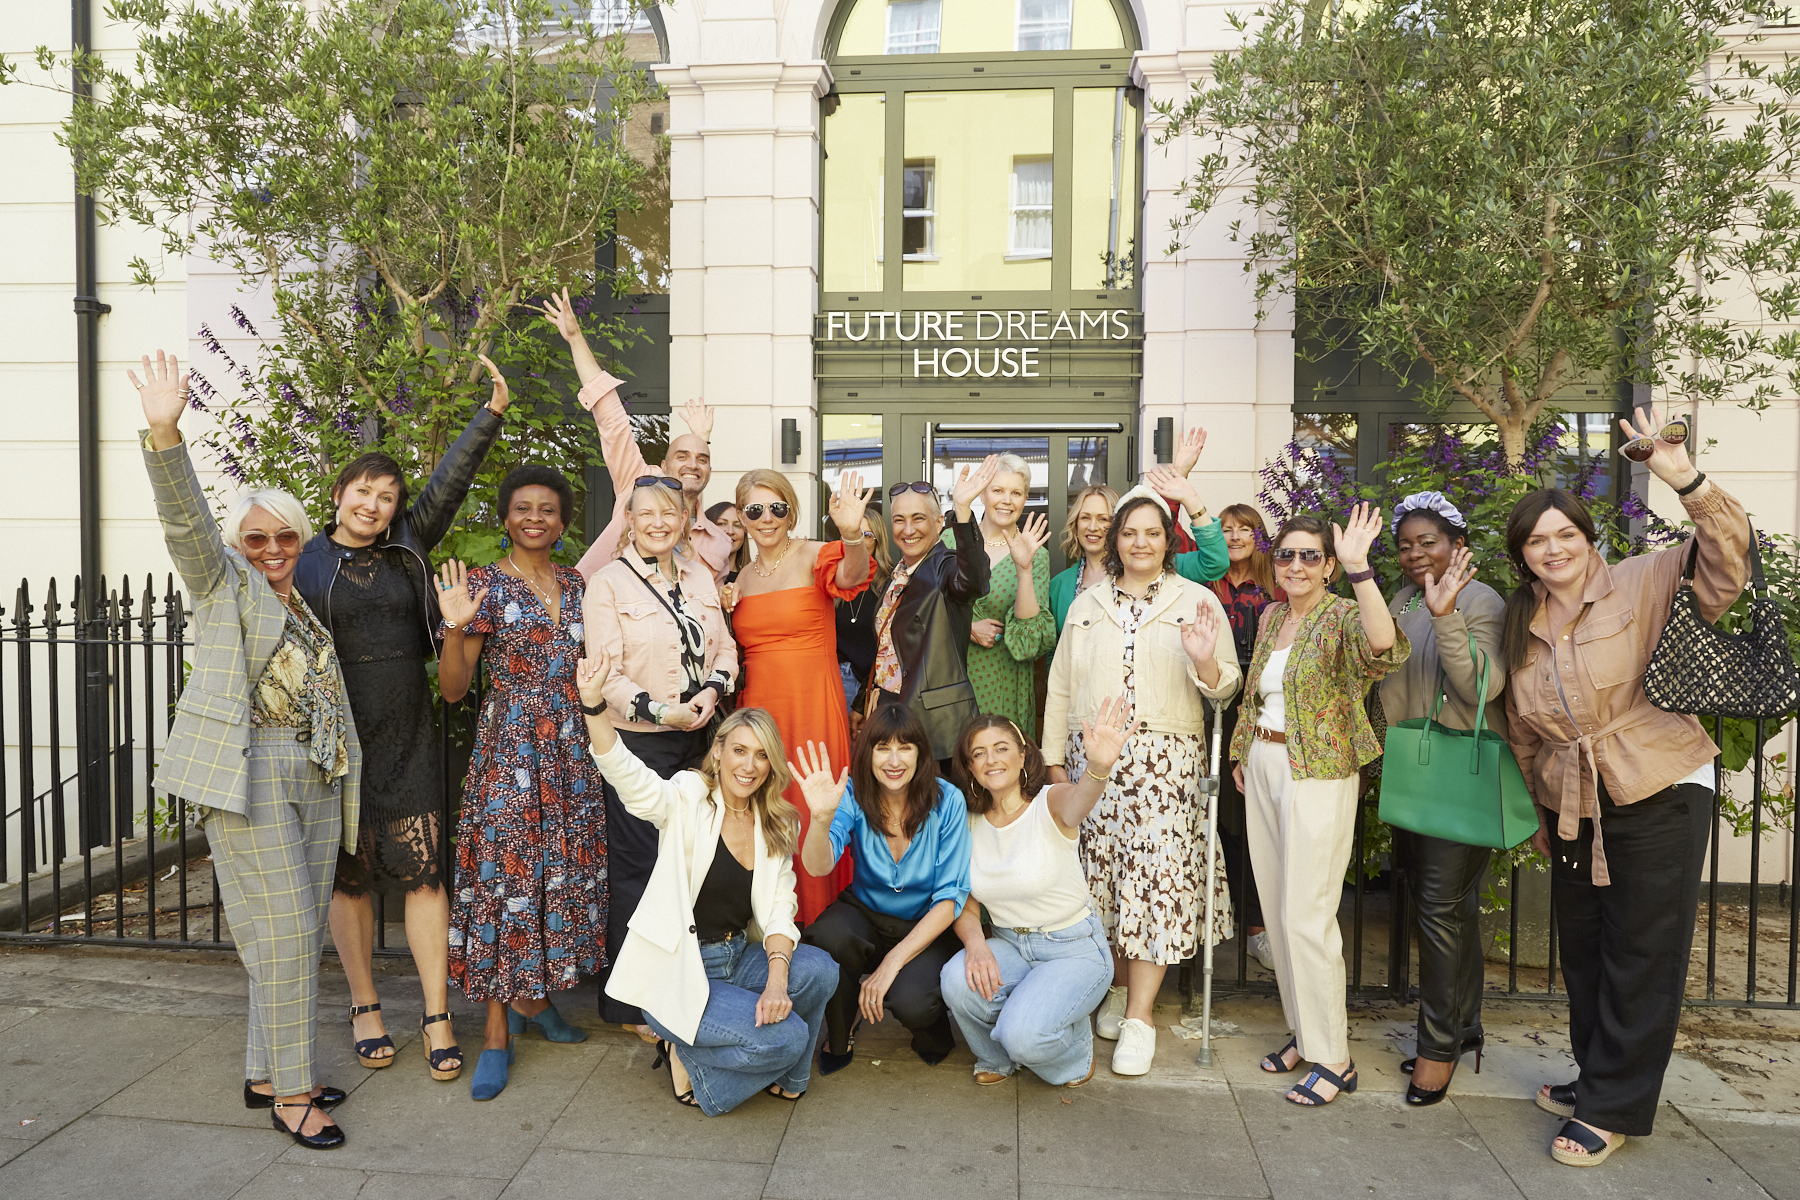 Breast cancer support patients outside Future Dreams House in London